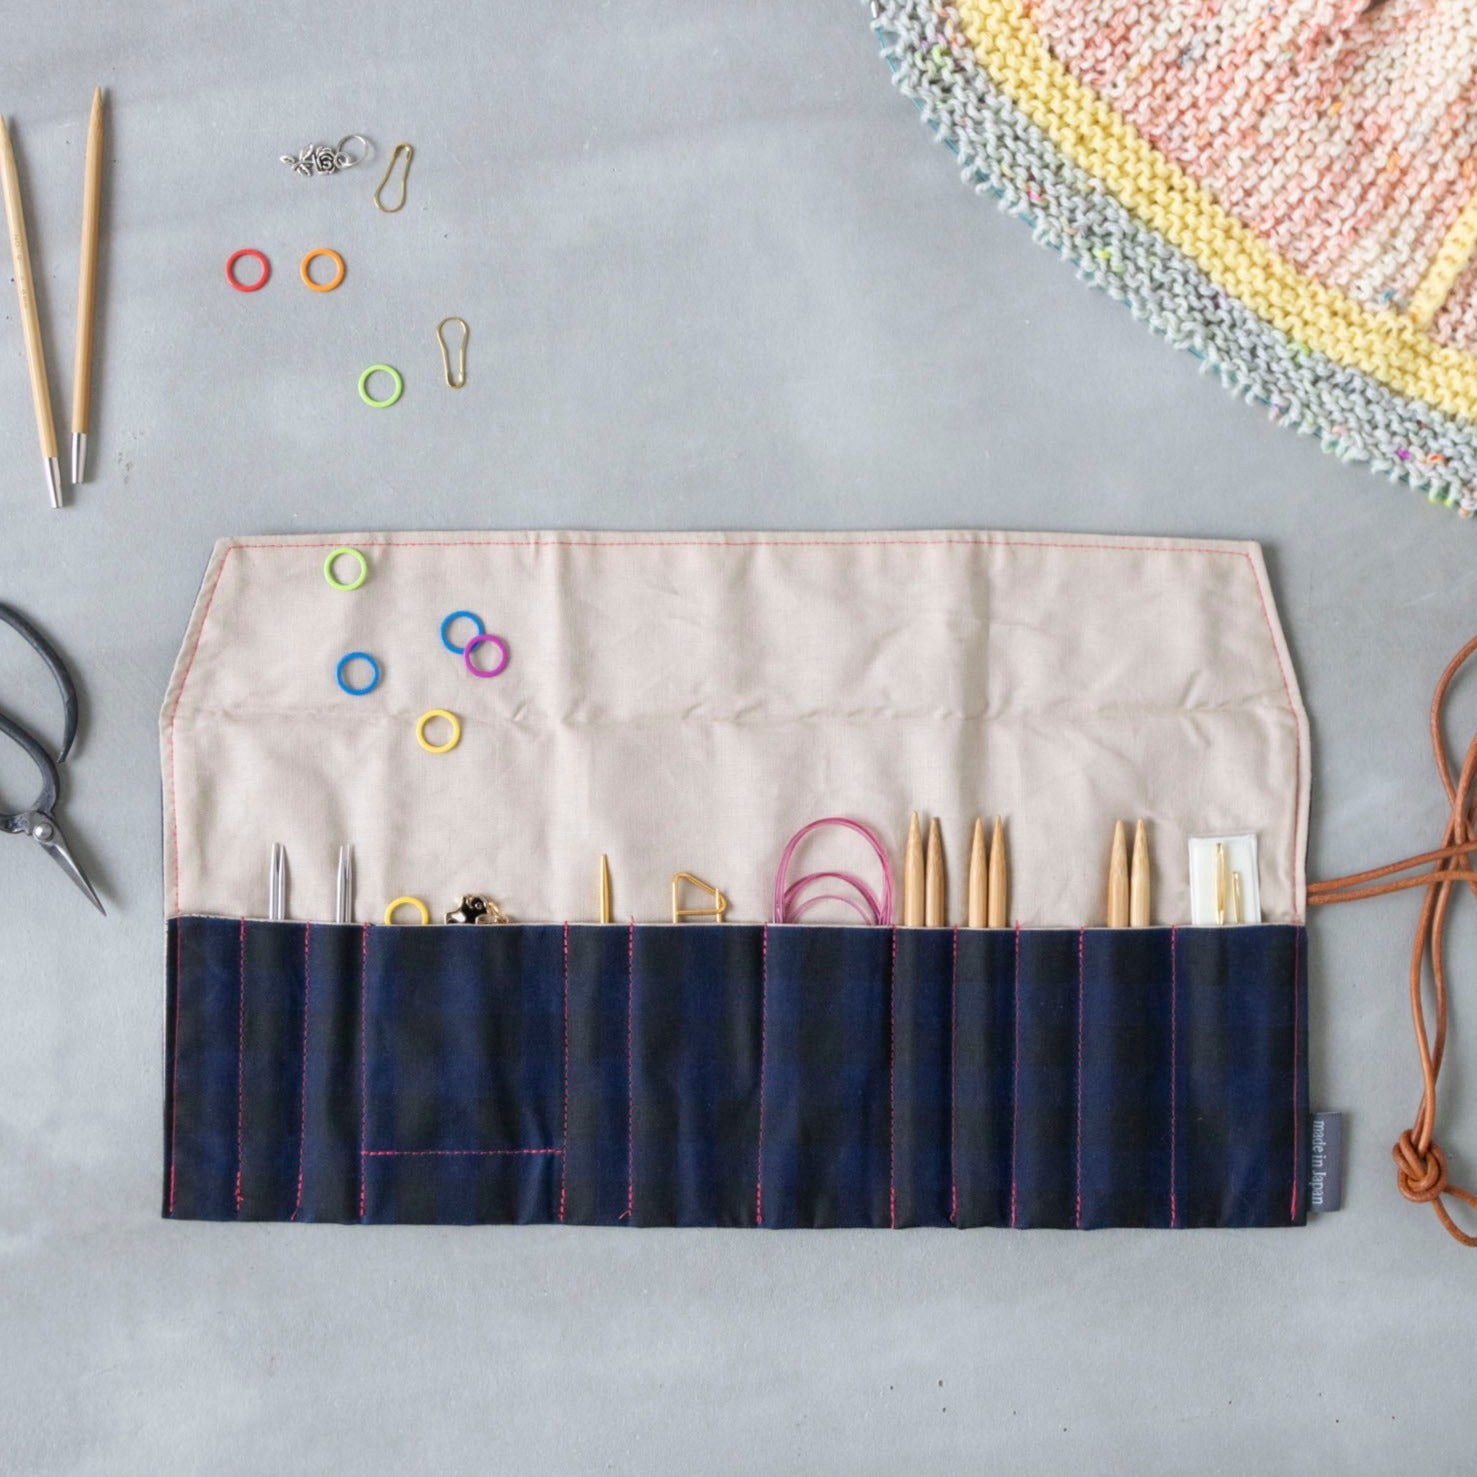 [sewing kit] Project Needle Case